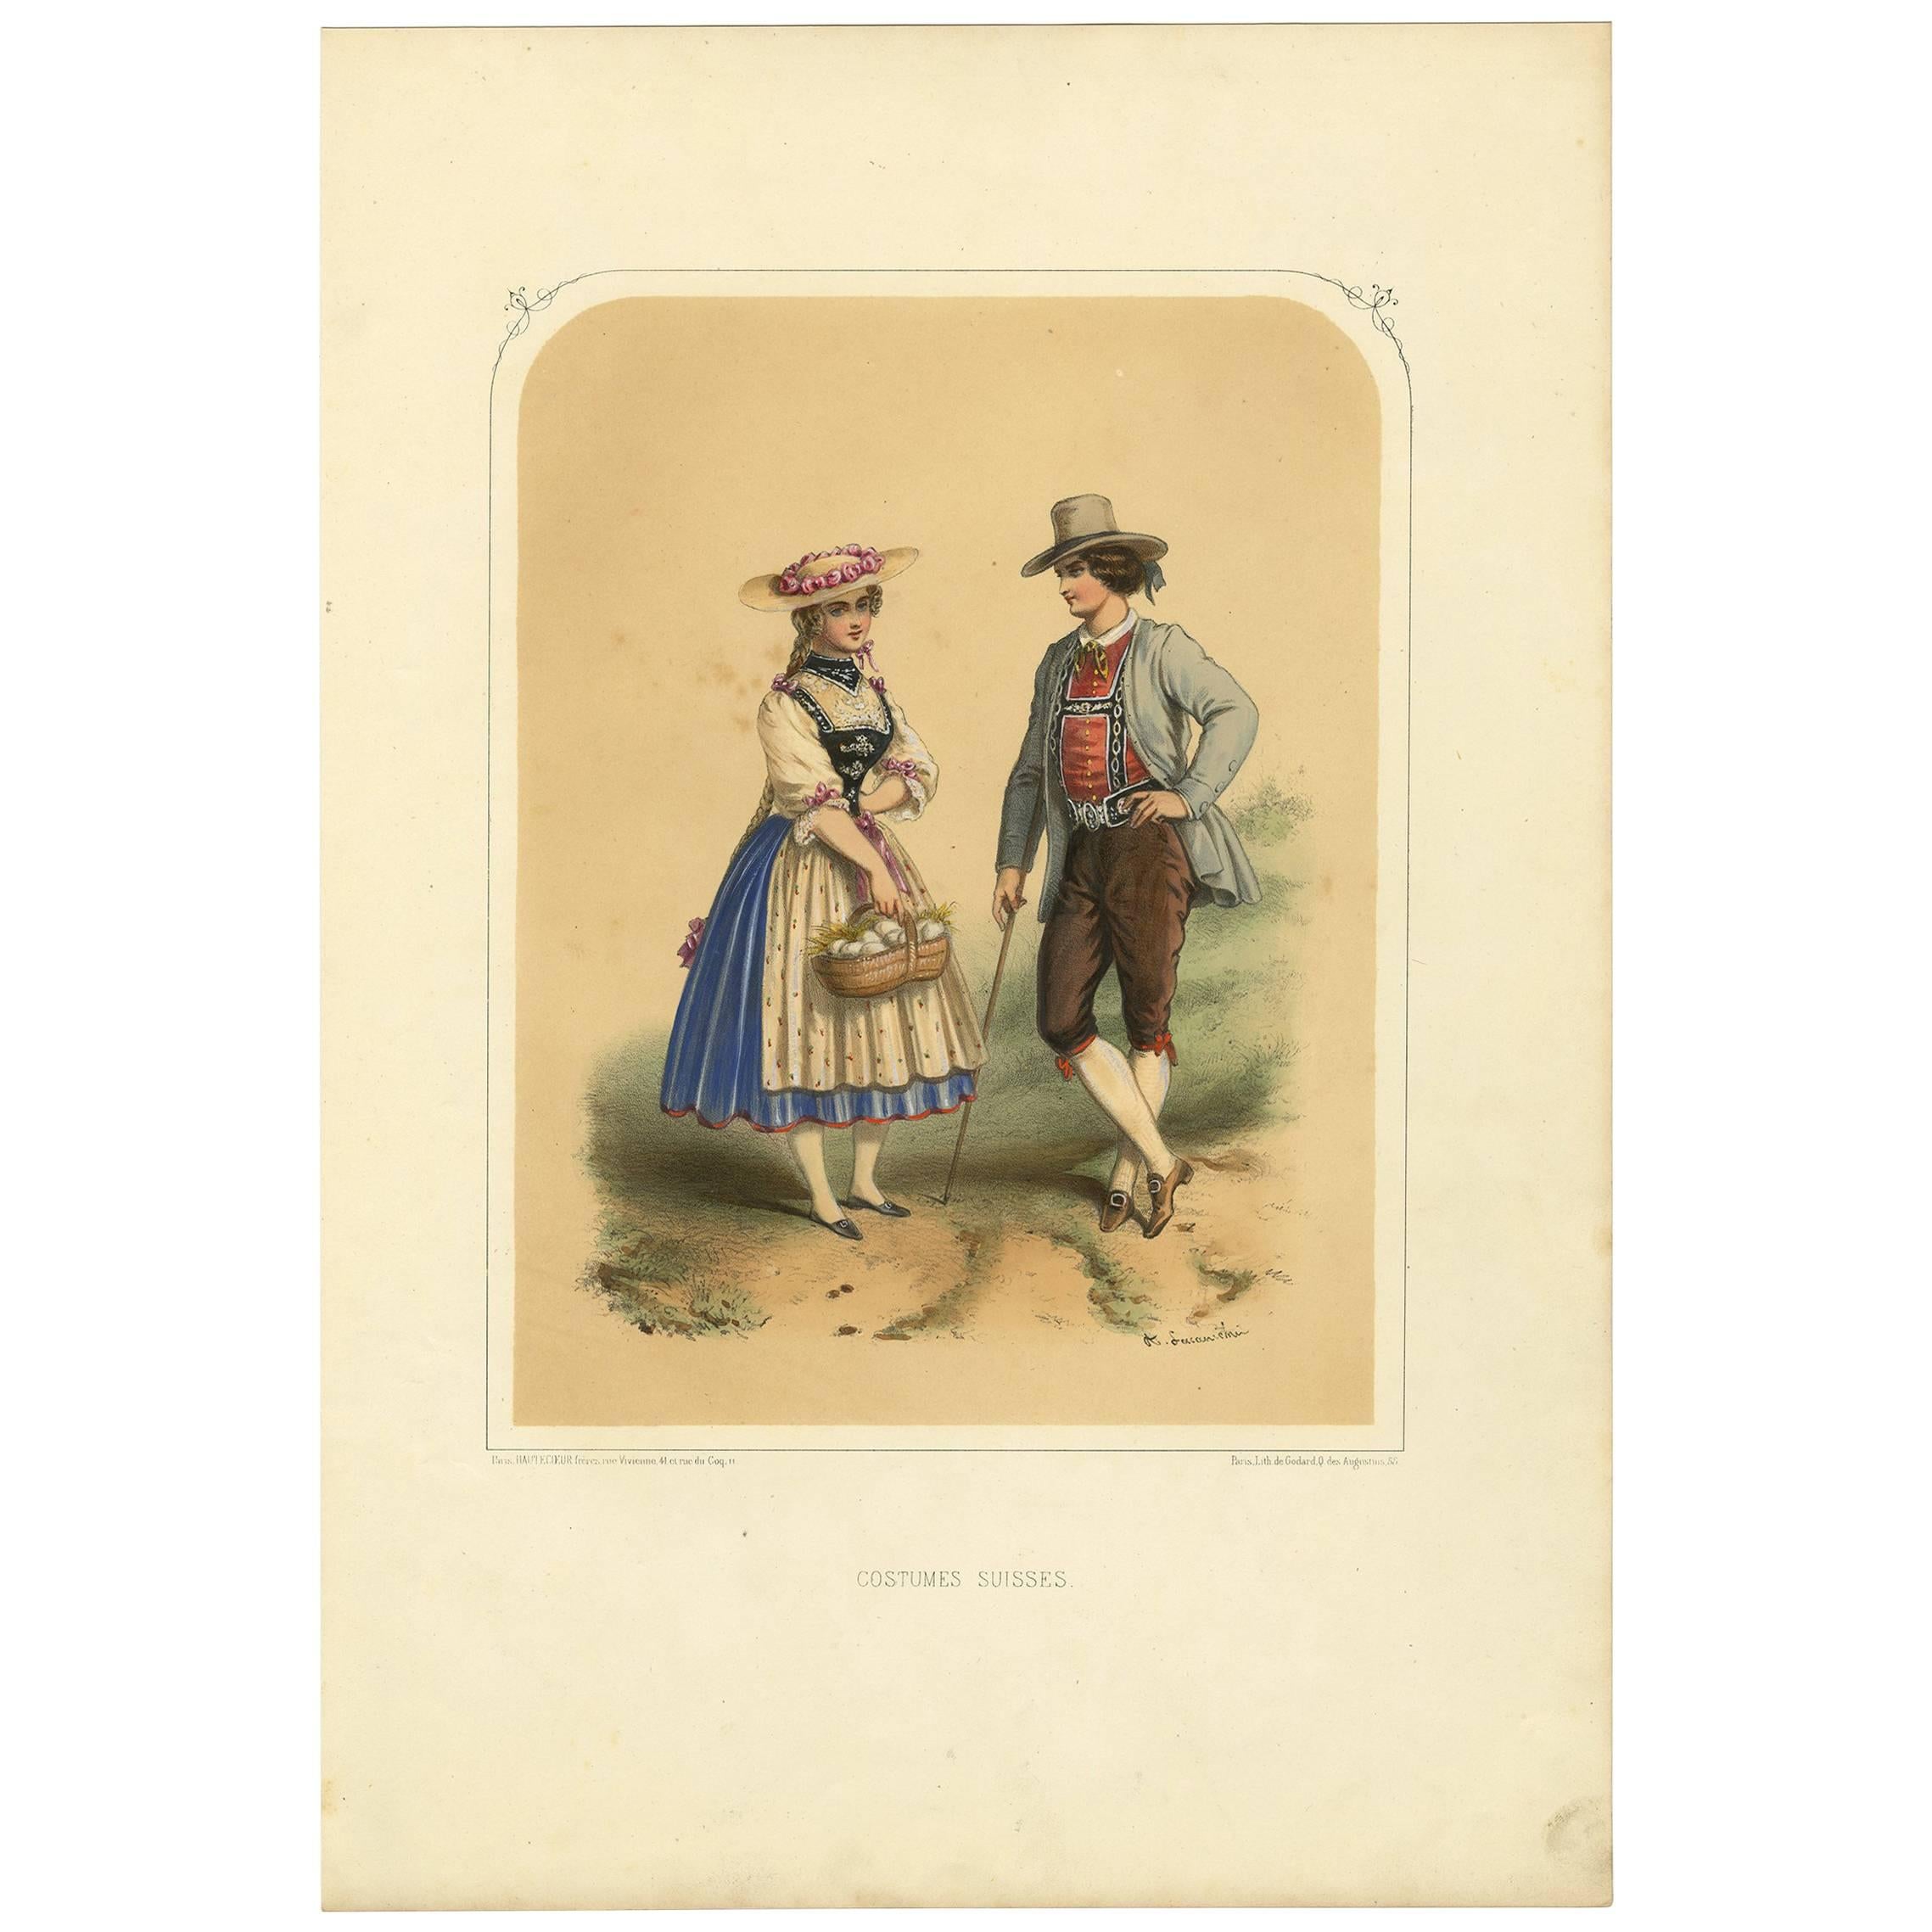 Antique Costume Print of Switzerland by A. Lacouchie, circa 1850